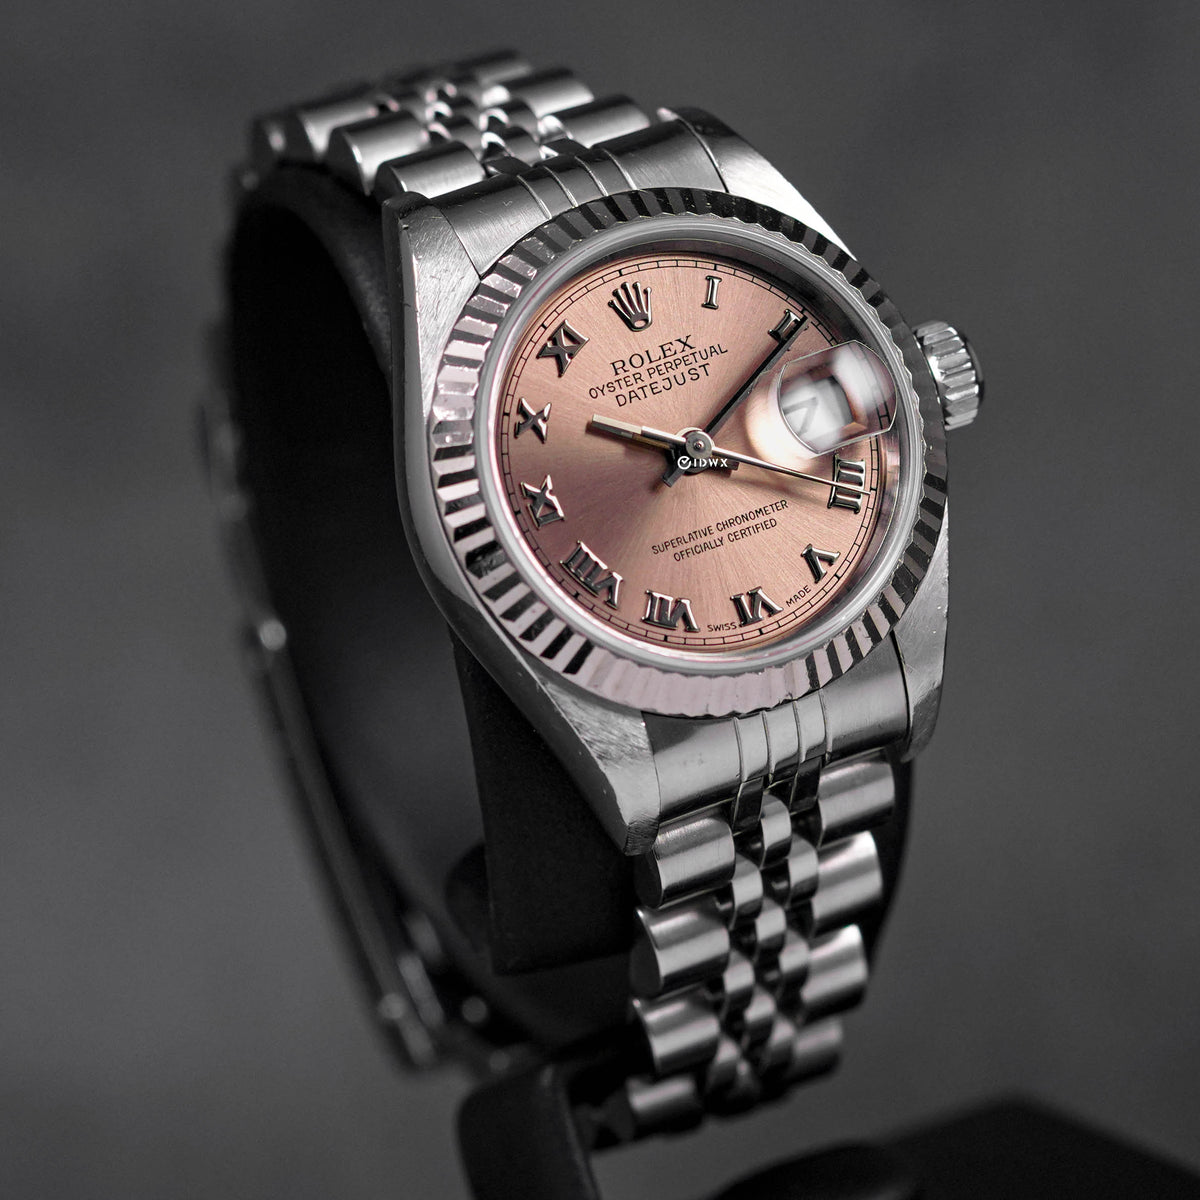 DATEJUST 26MM SALMON ROMAN DIAL (WATCH ONLY)